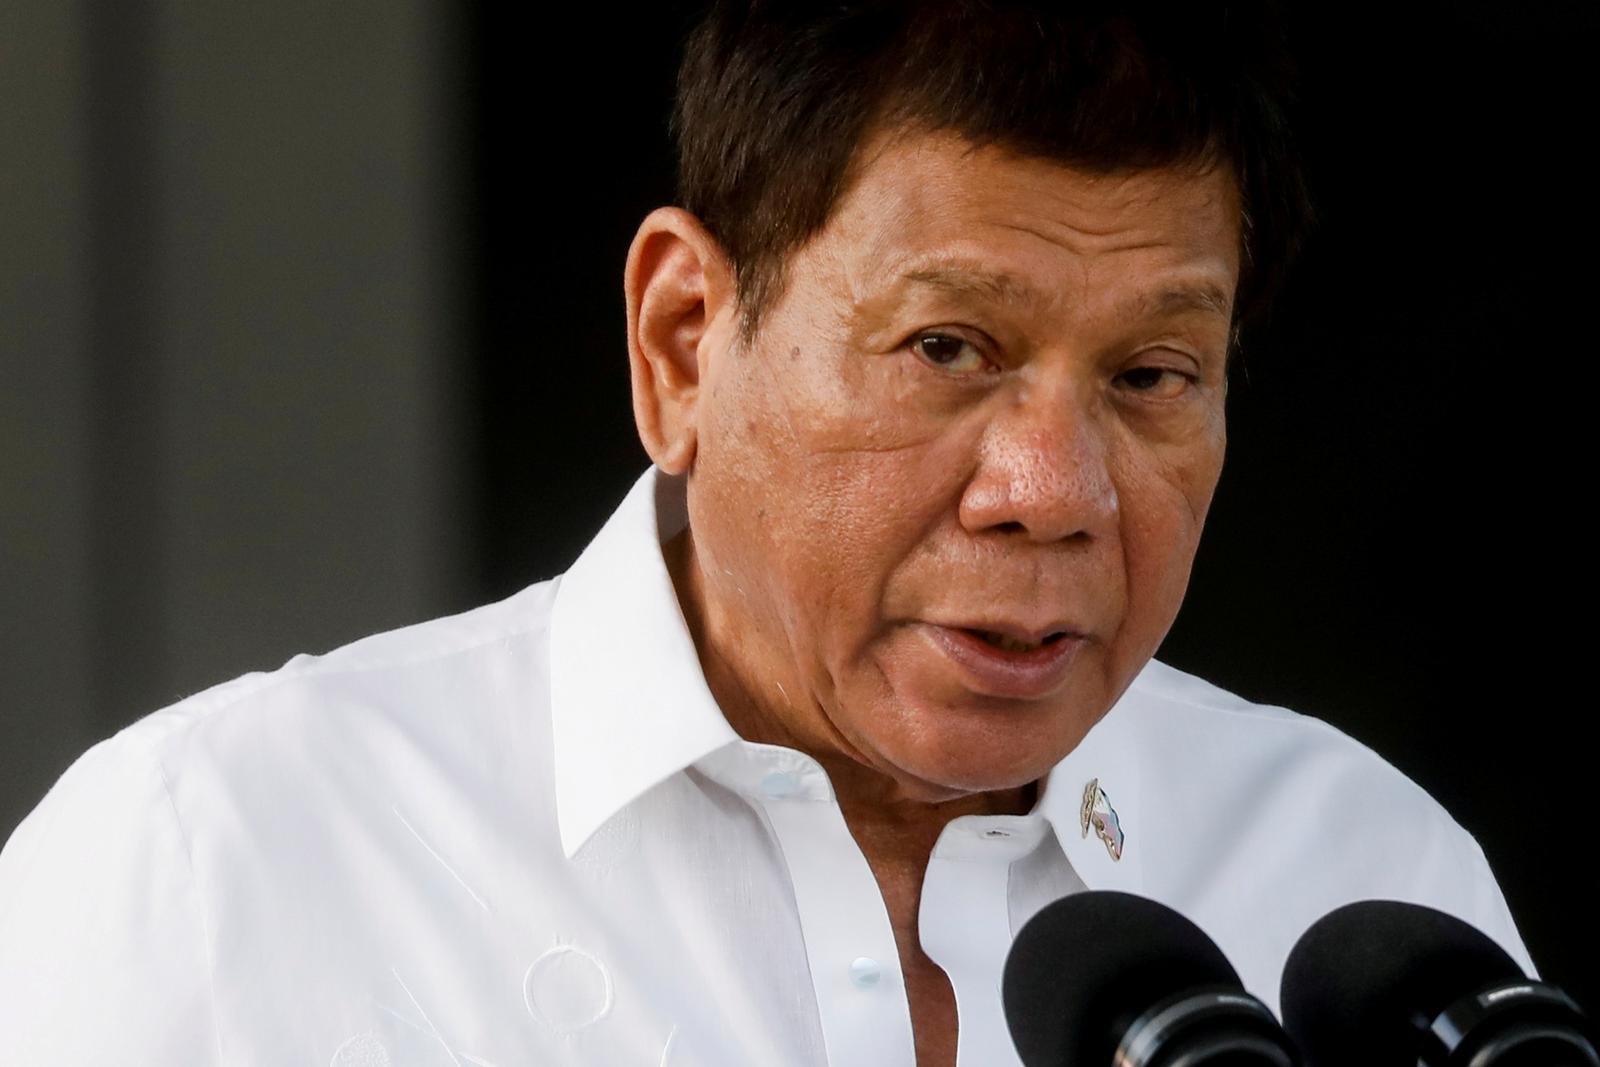 FILE PHOTO: Philippine President Rodrigo Duterte speaks during the arrival ceremony for the first COVID-19 vaccines to arrive in the country, at Villamor Air Base in Pasay, Metro Manila, Philippines, February 28, 2021. REUTERS/Eloisa Lopez/File Photo